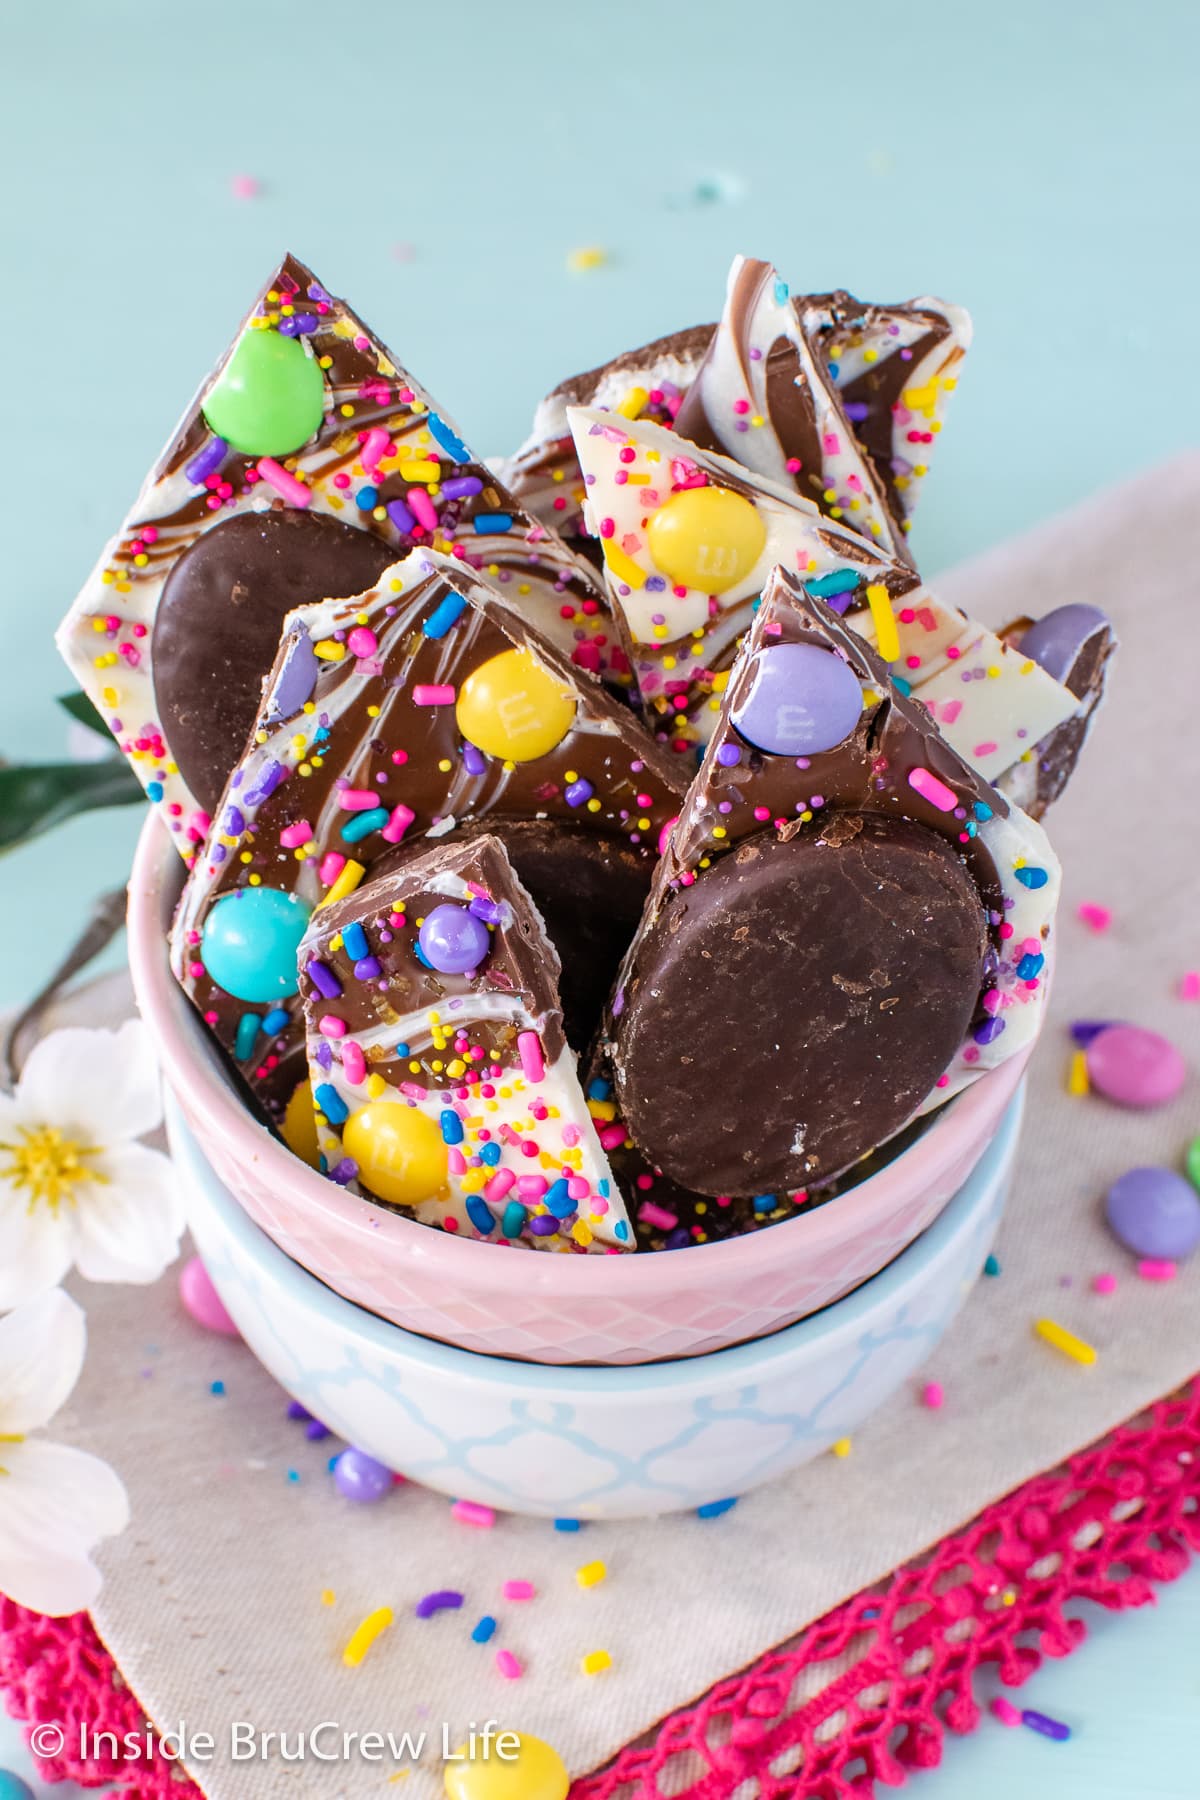 Chunks of swirled chocolate bark with candies in a bowl.